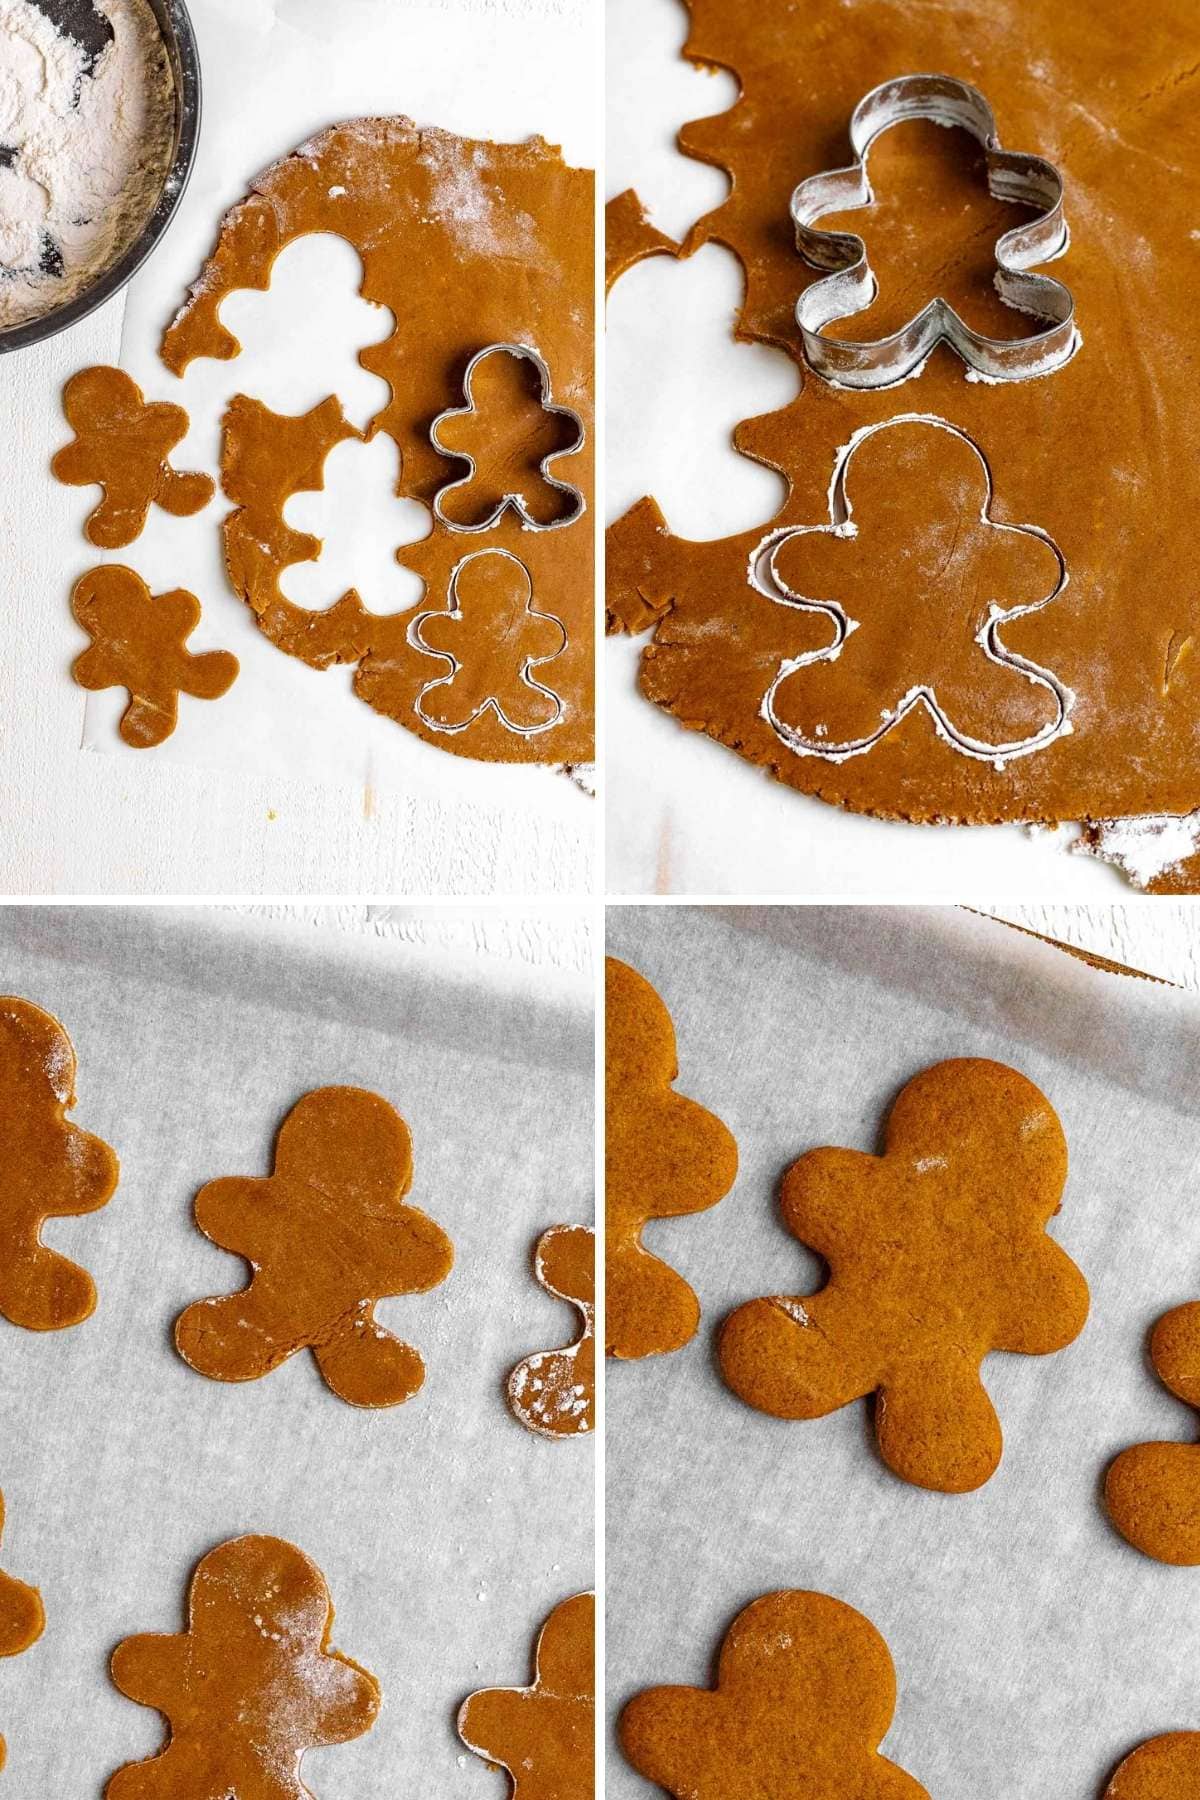 Collage showing steps for cookie cutting and baking.